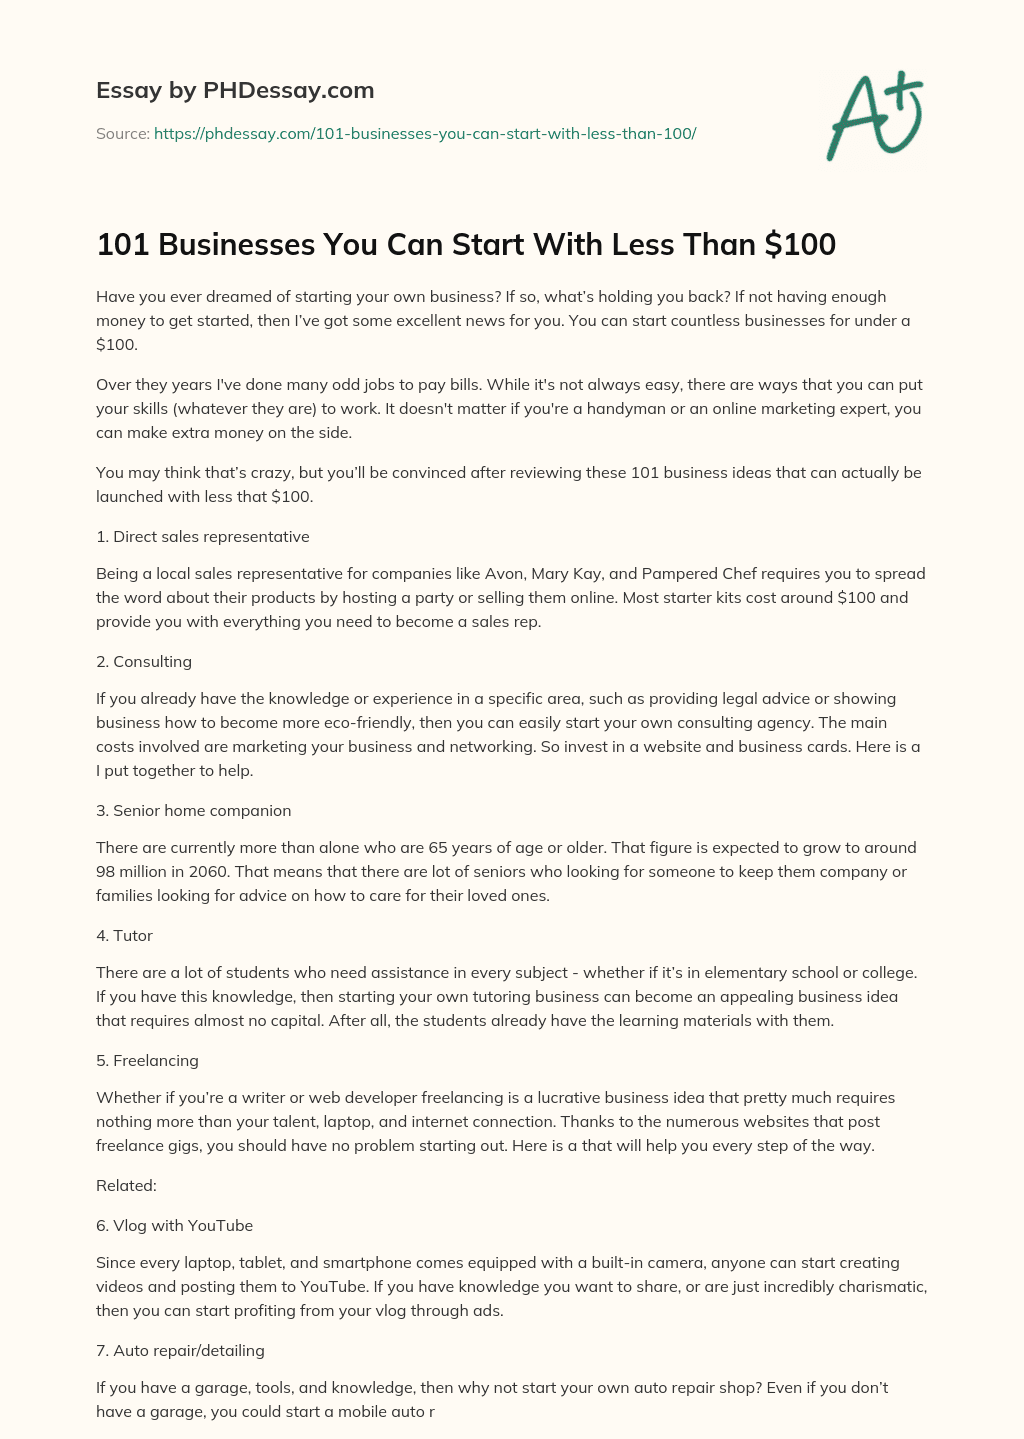 101 Businesses You Can Start With Less Than $100 essay